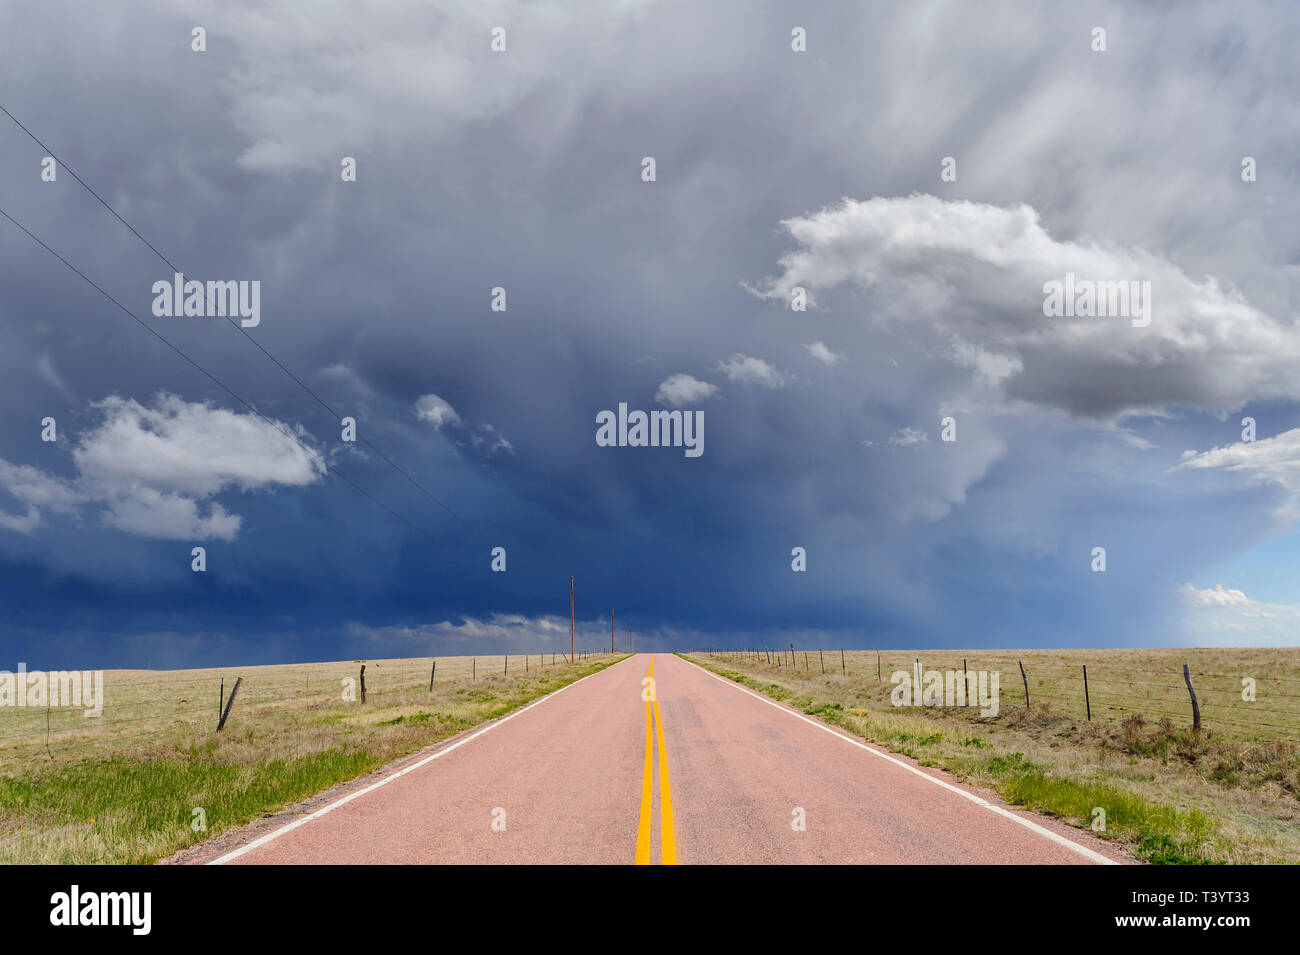 Storm clouds over open road, Rush, Colorado, United States Stock Photo